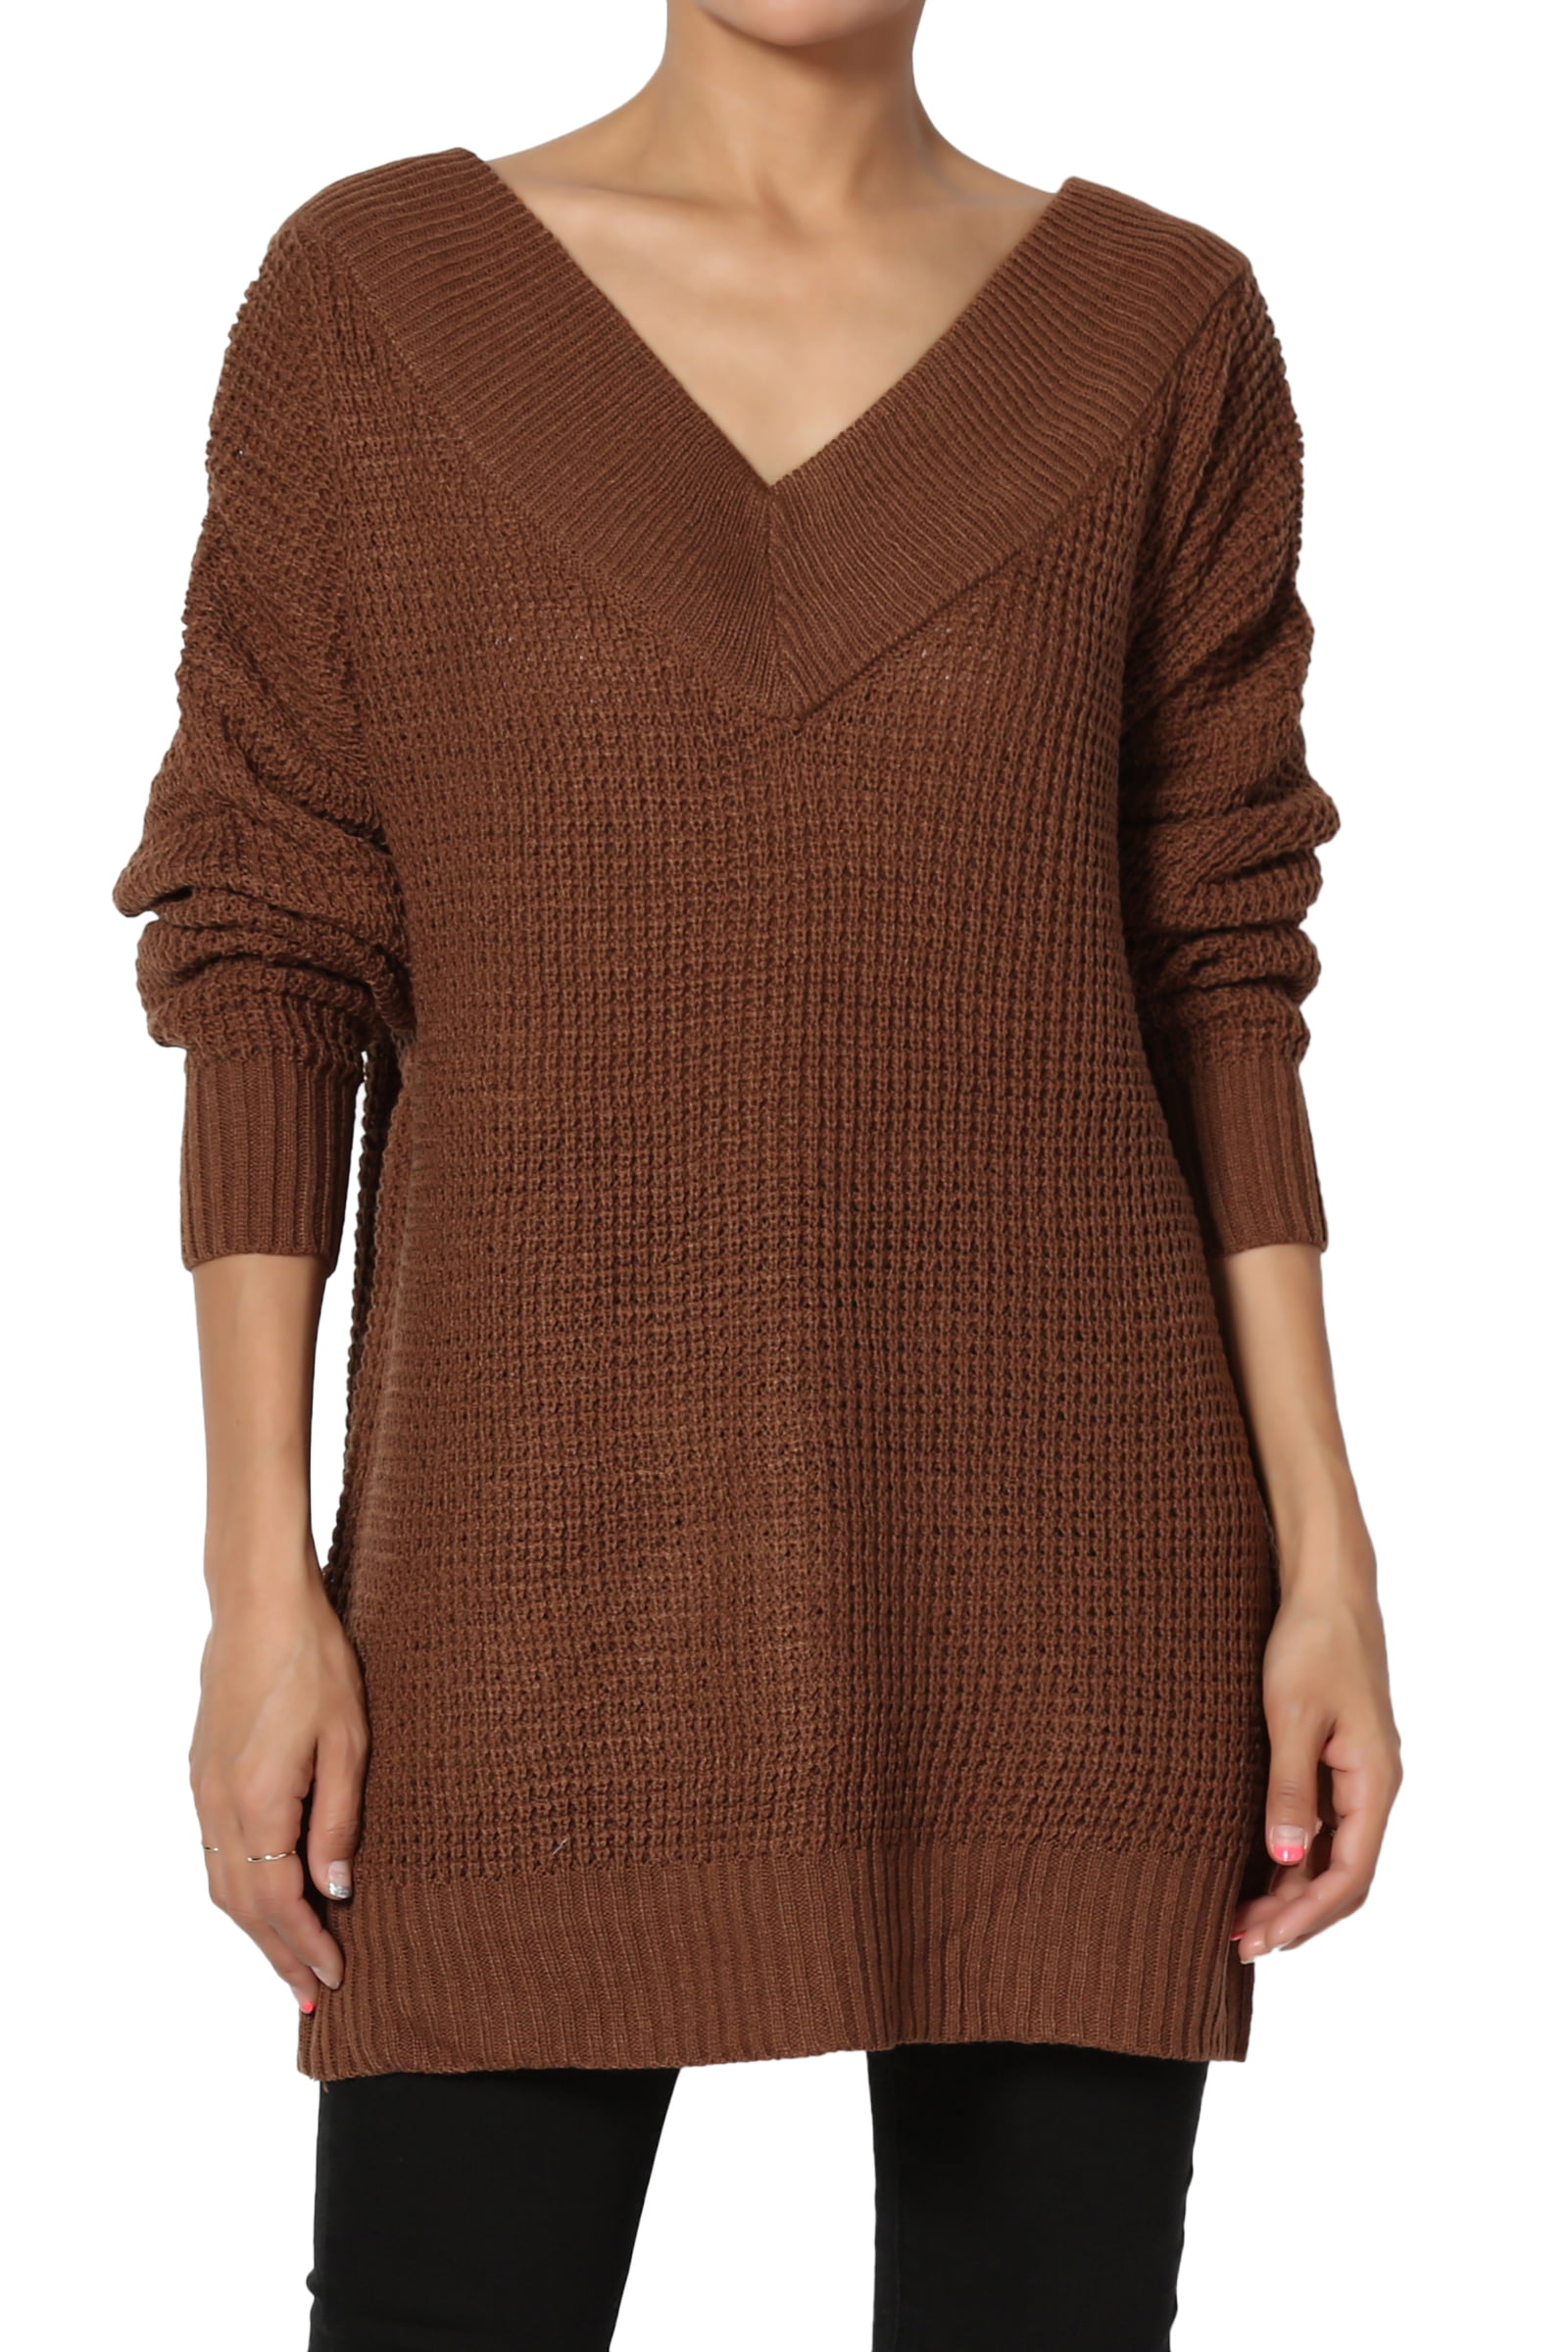 TheMogan Women's S~3X Off Shoulder Waffle Knit Wide V-Neck Tunic